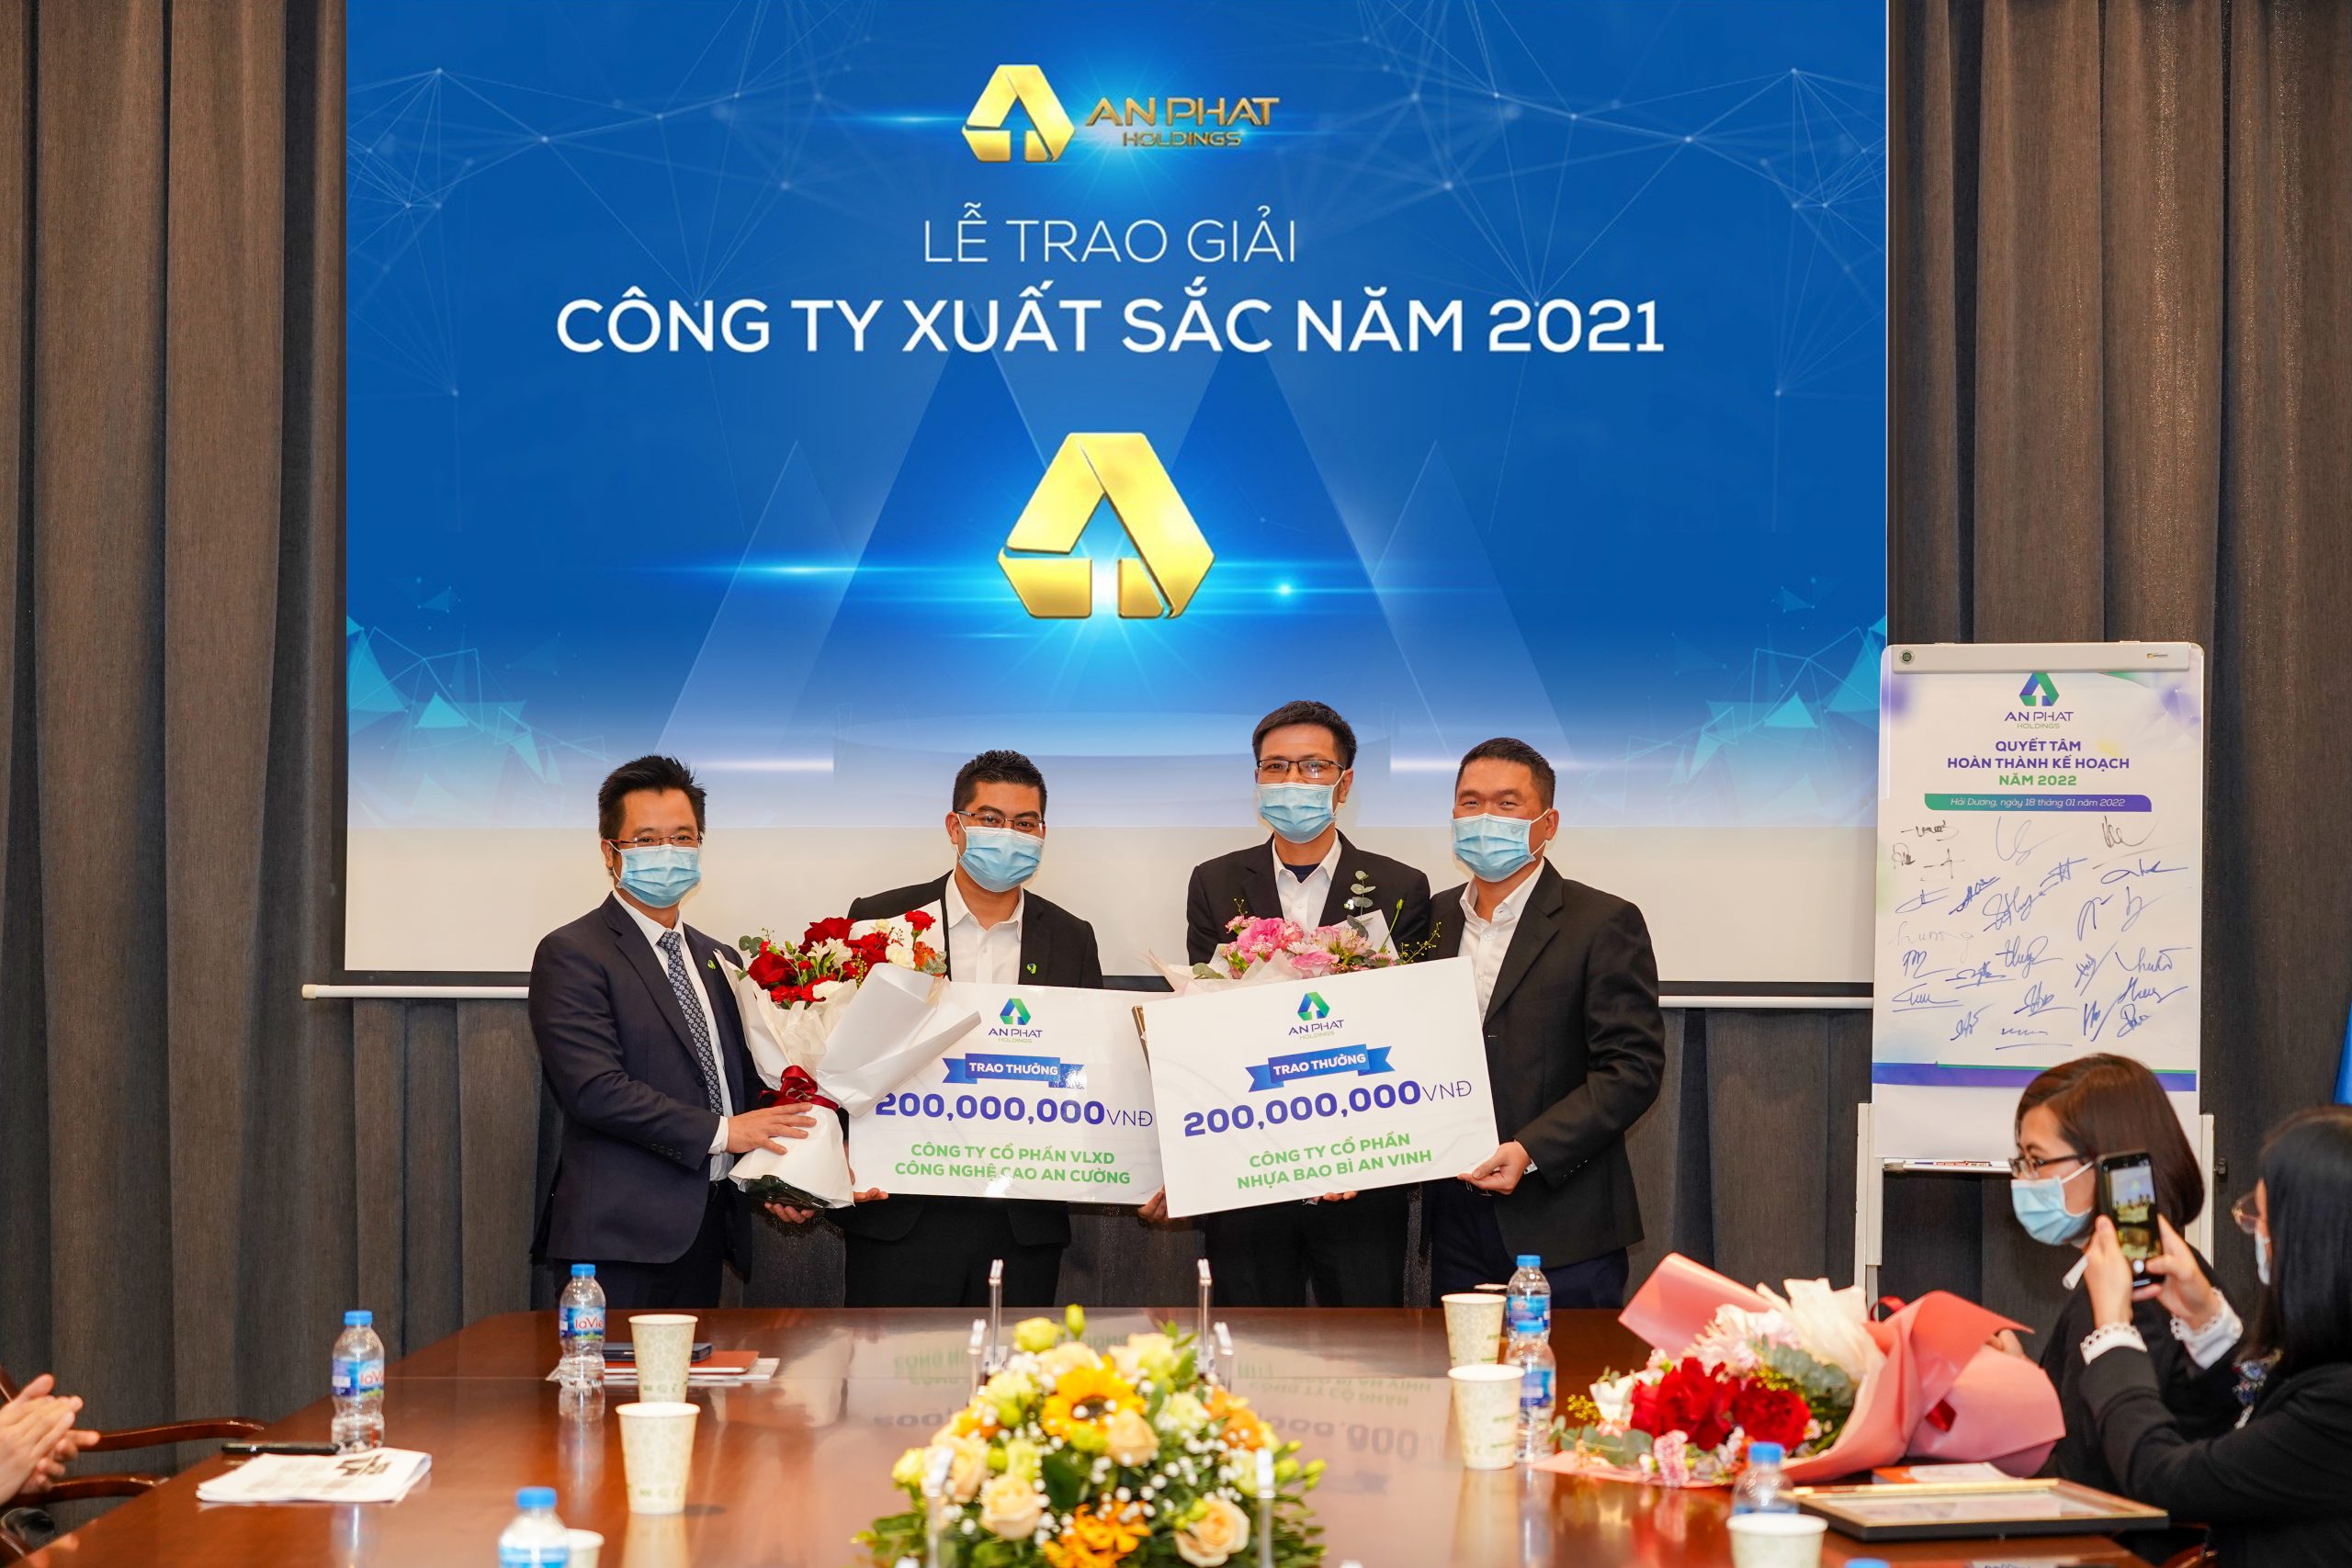 An Vinh Packaging Plastic JSC. and An Cuong Hi-Tech Building Materials JSC. also received awards 